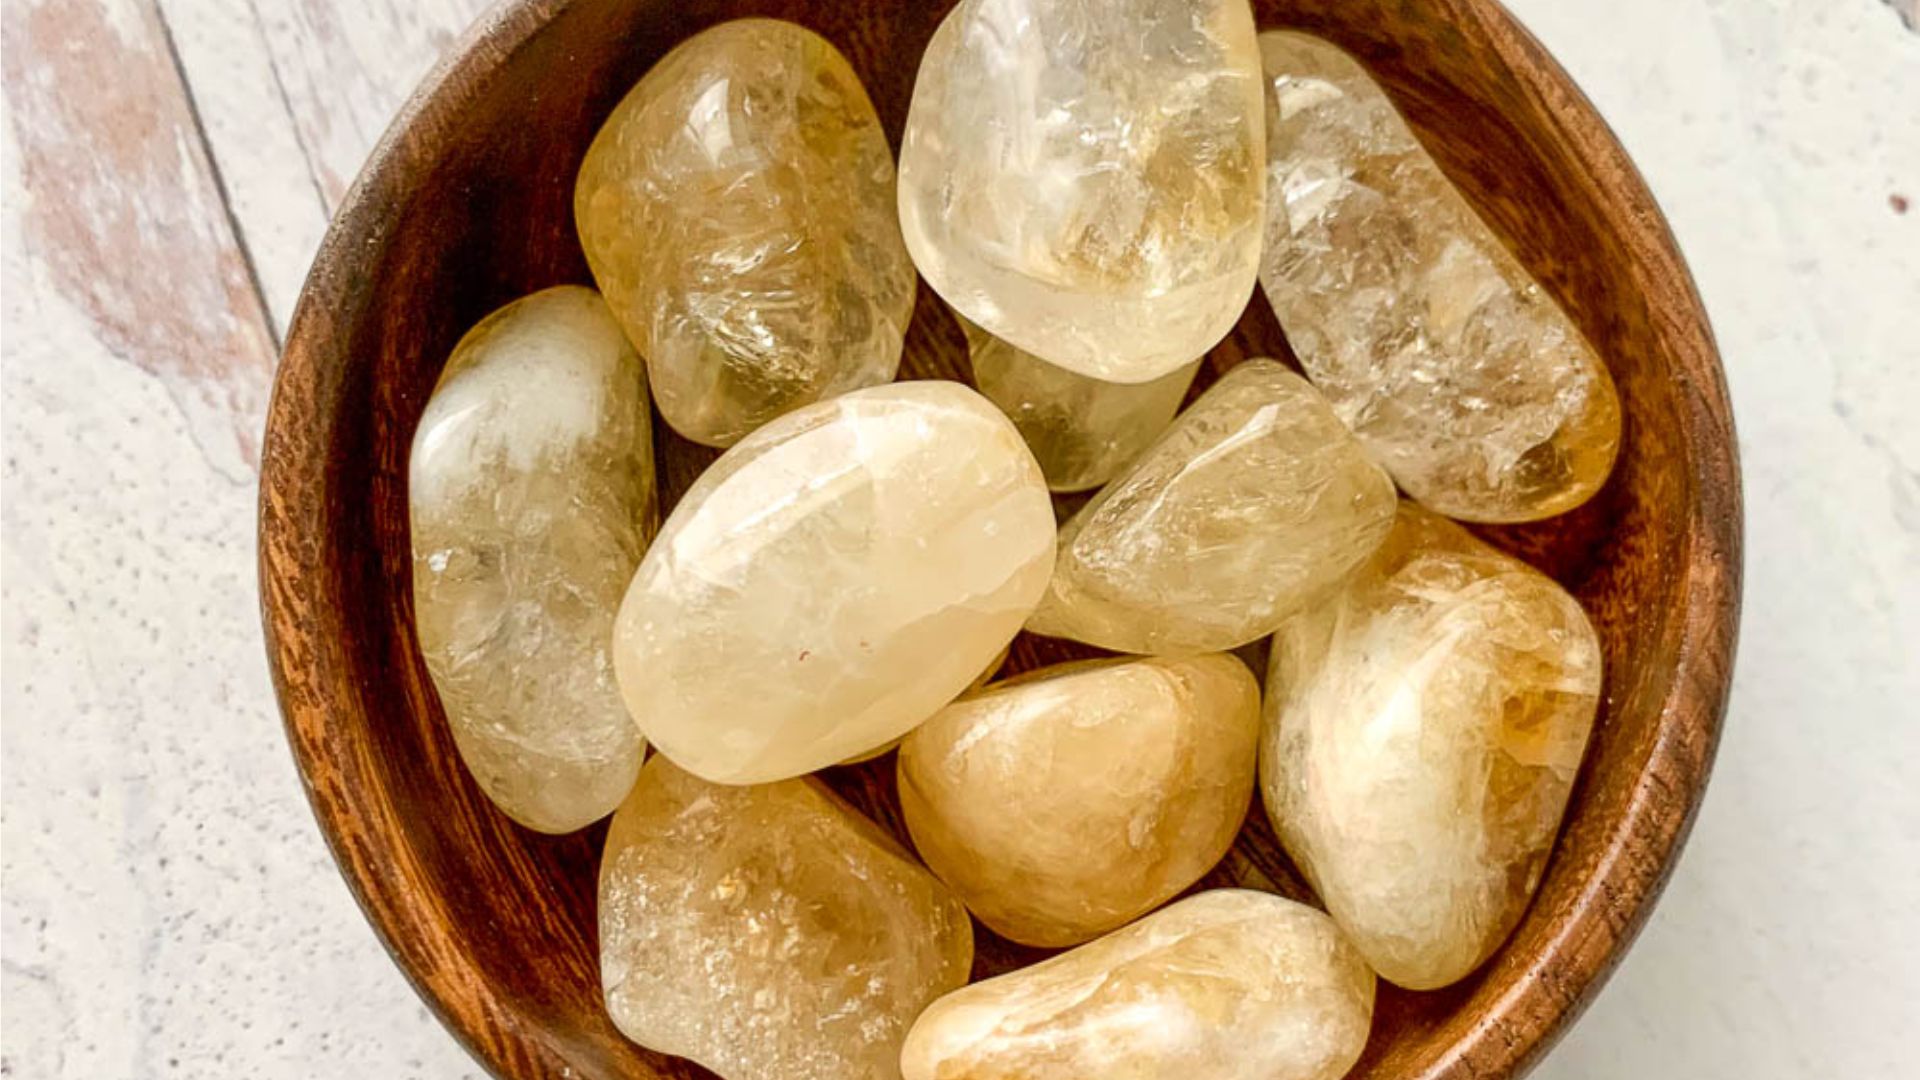 Crystals In Wooden Bowl